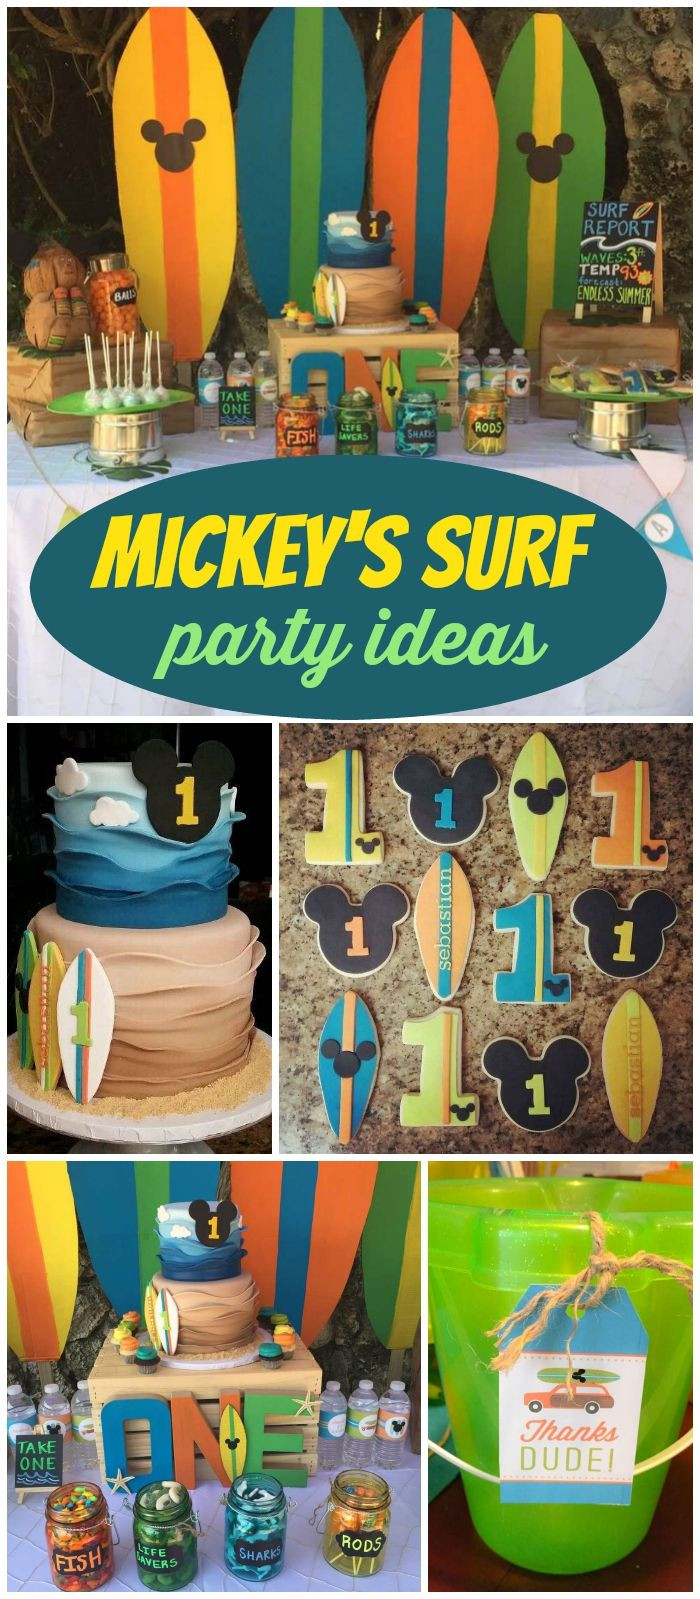 Mickey Mouse Beach Party Ideas
 Check out this Mickey Mouse surfing party See more party